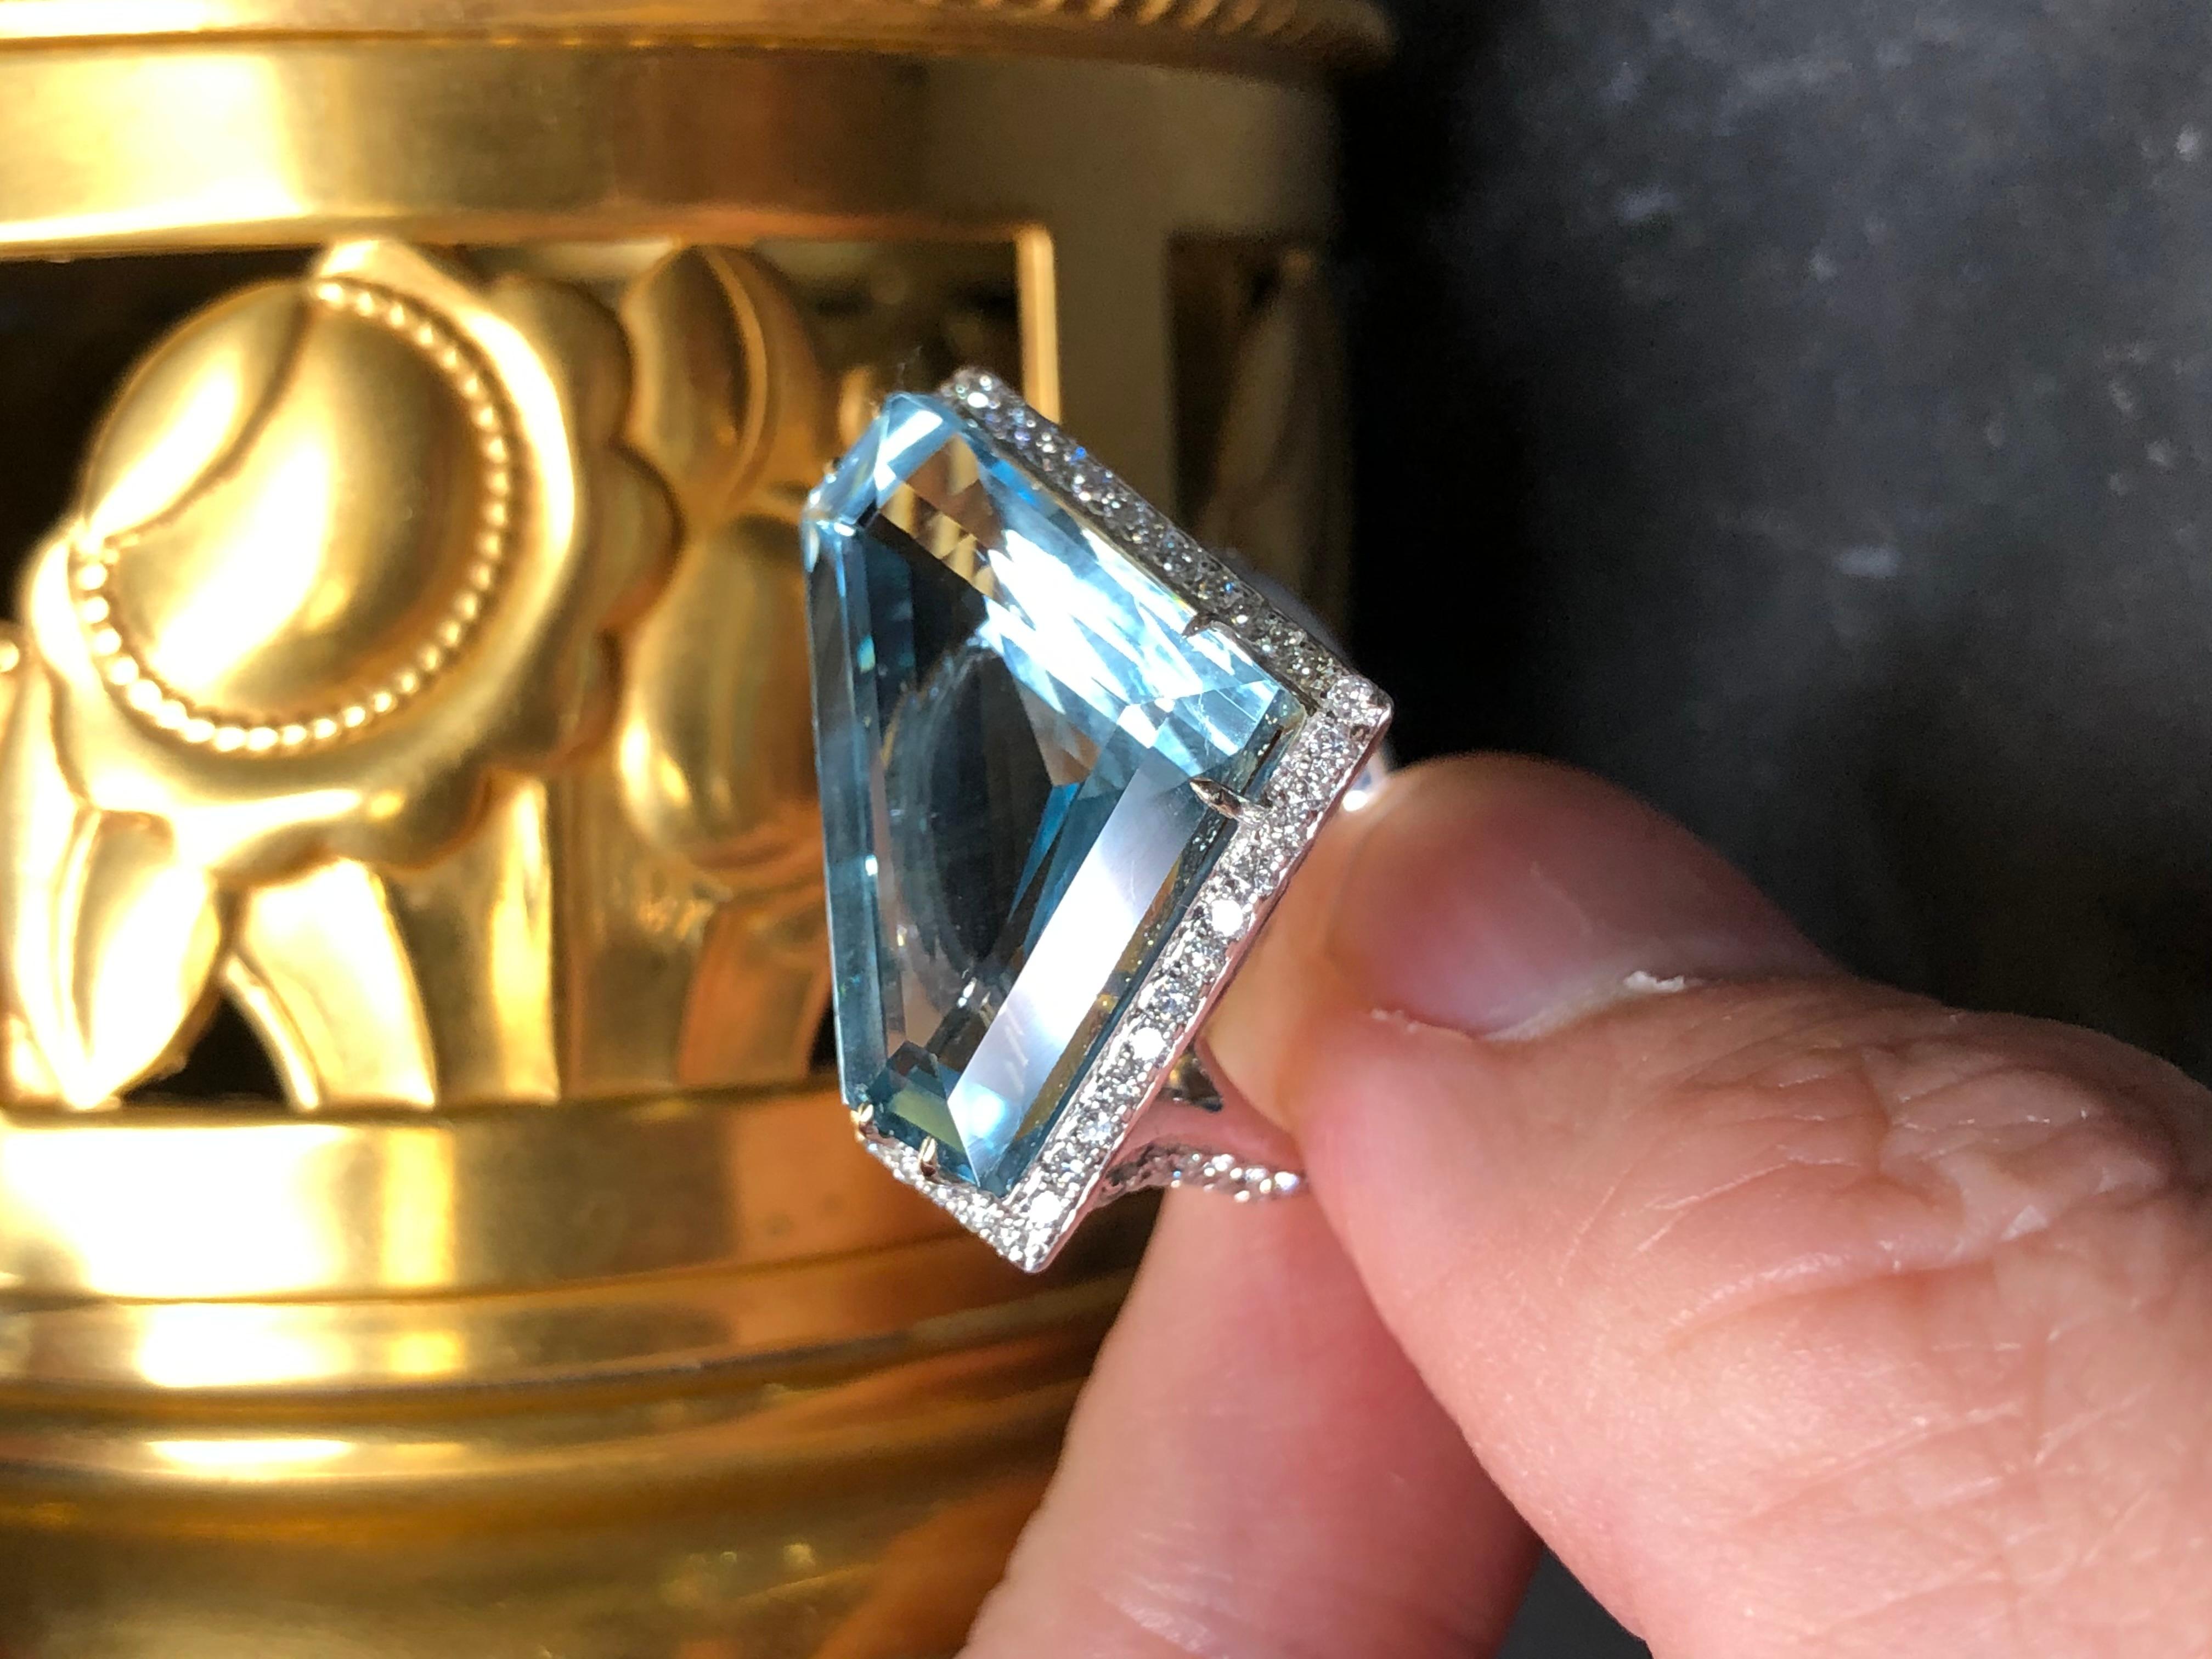 An exquisite ring and very original in its design with great attention to detail. This ring was hand crafted around the uniquely cut aquamarine to produce an absolutely fabulous piece. It is done in 18K white gold and centered by a 17.06ct natural